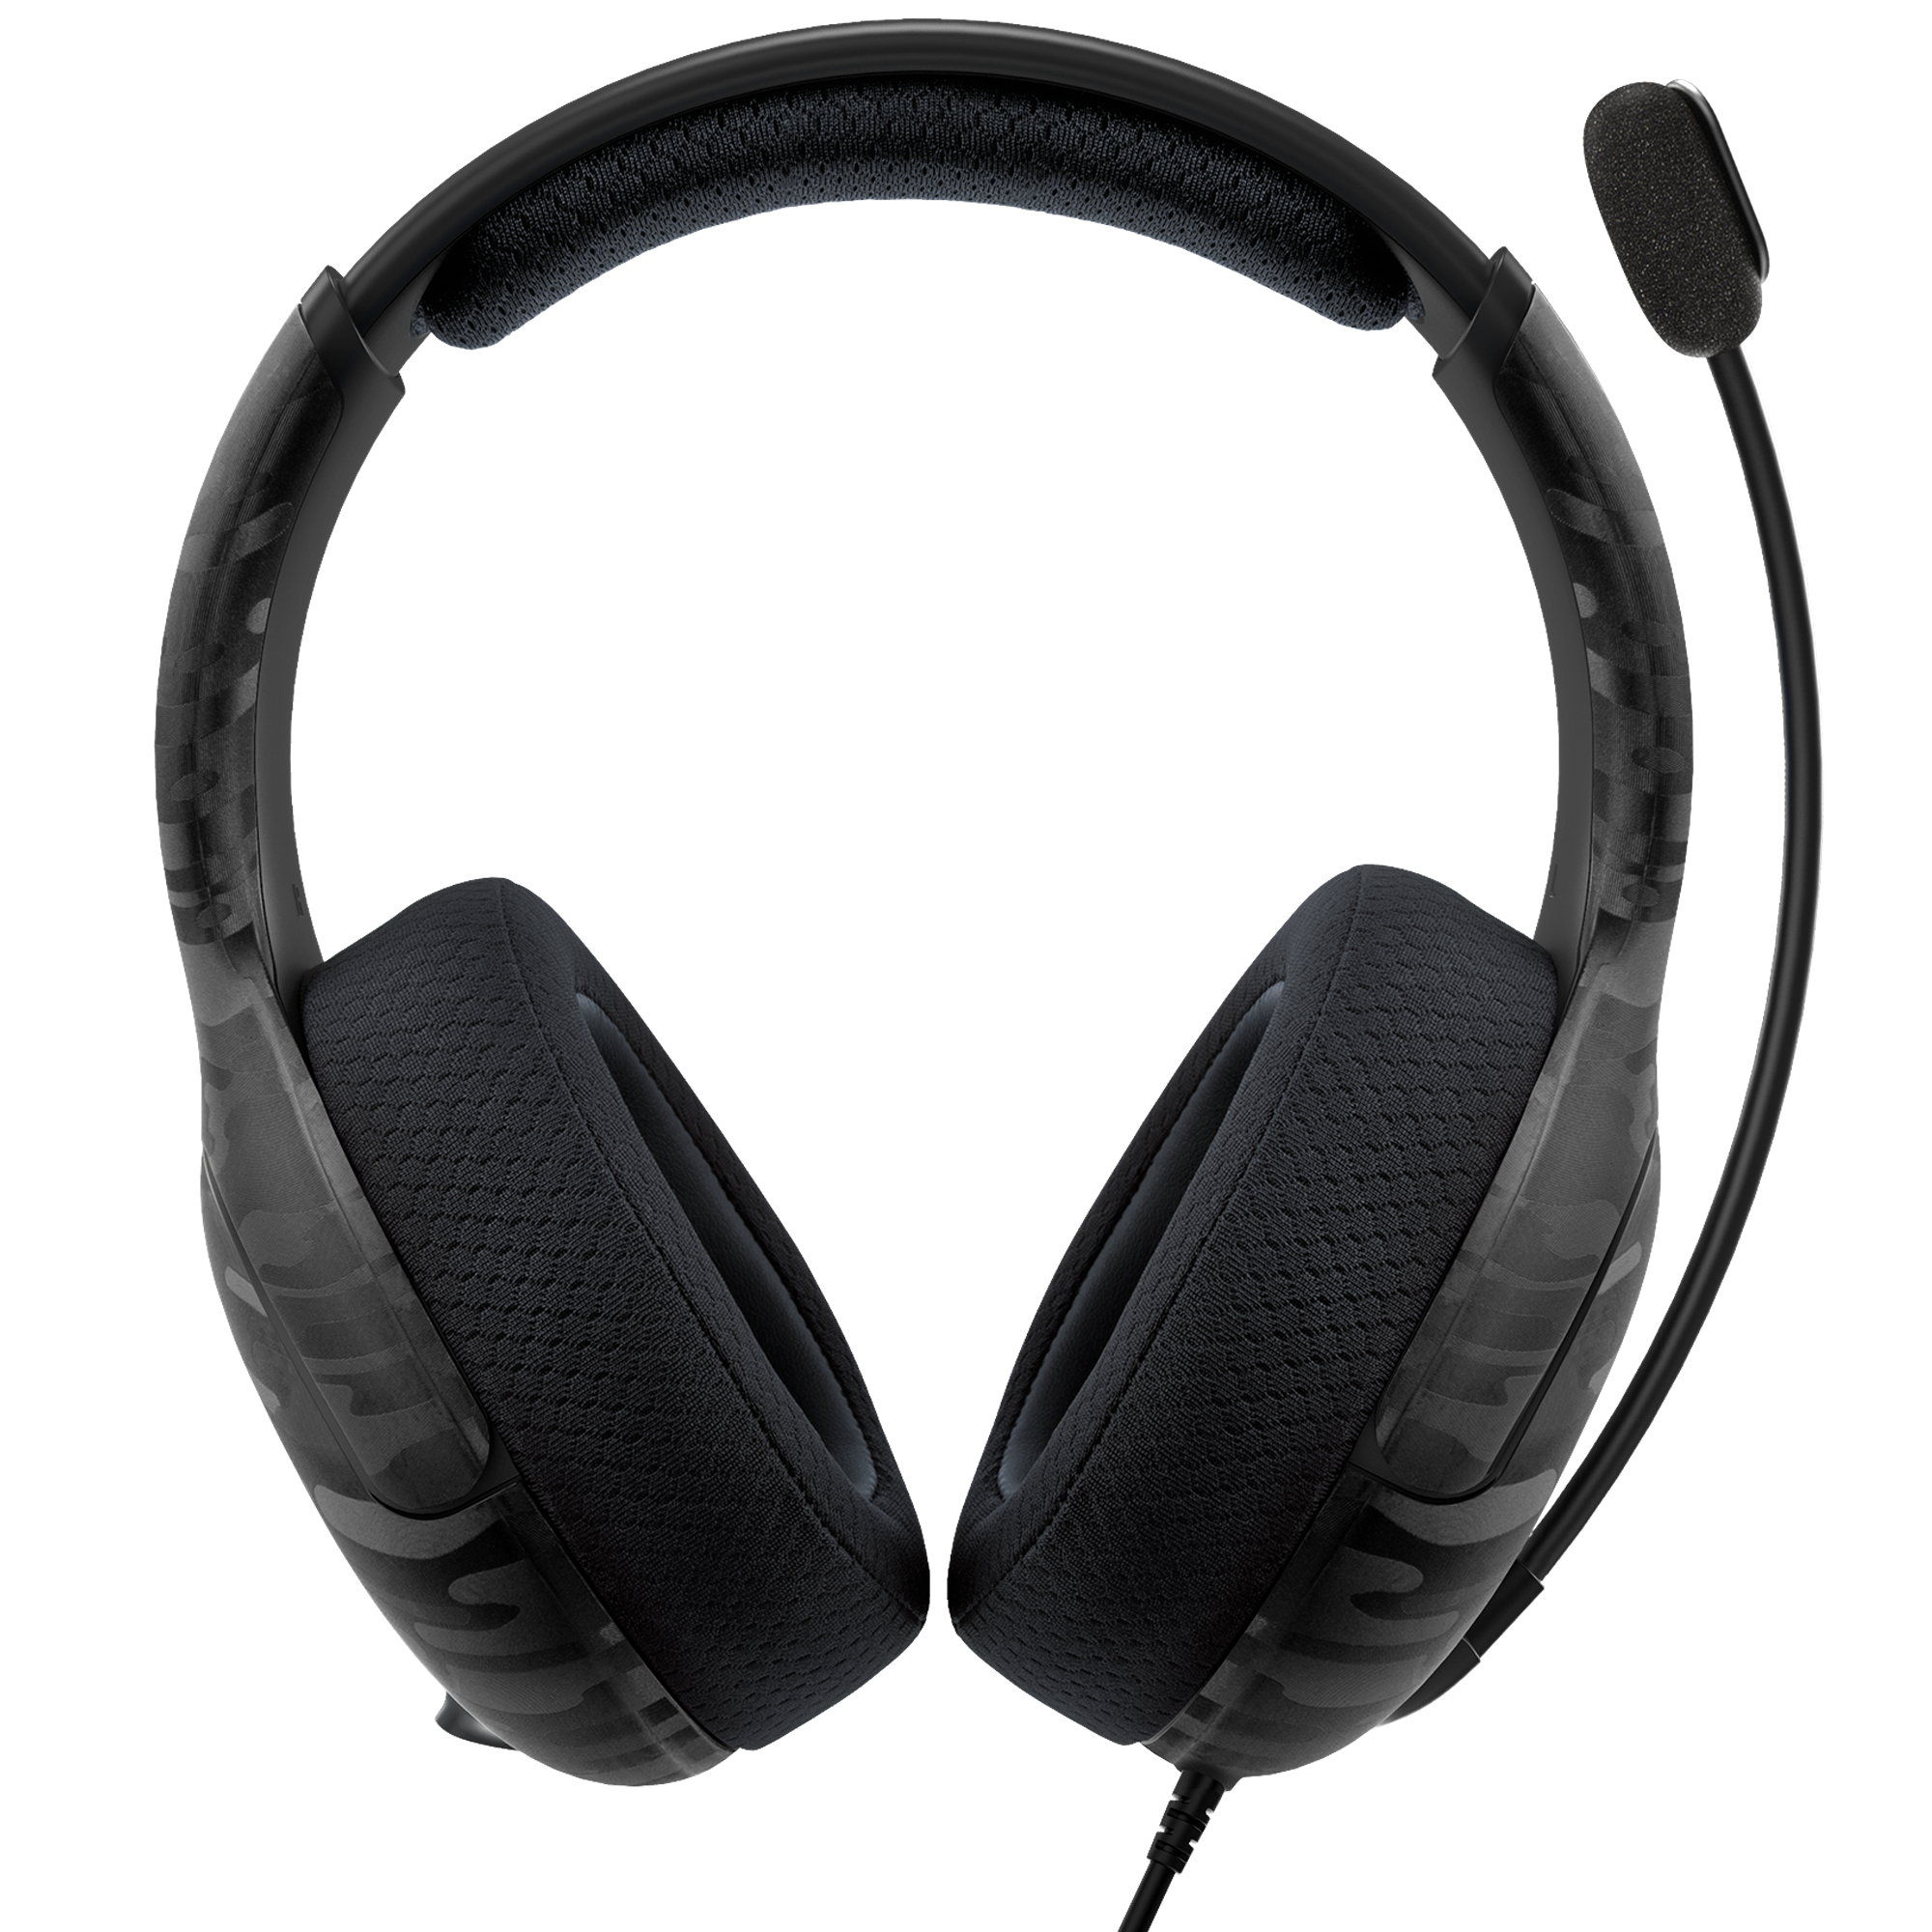 PDP Xbox One Lvl 1 Chat Gaming Headset